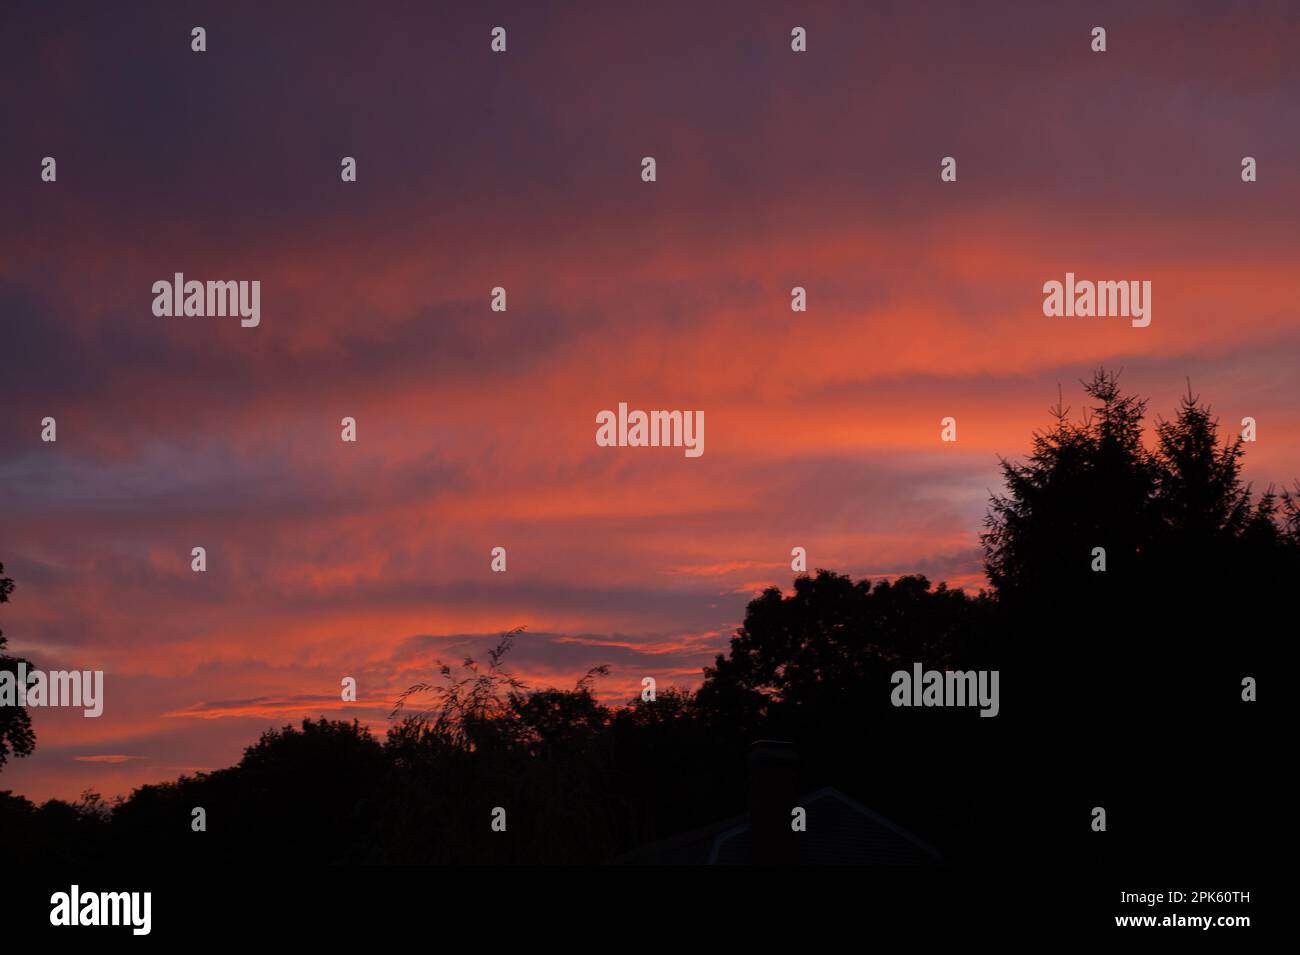 Striated sunset after storm Stock Photo